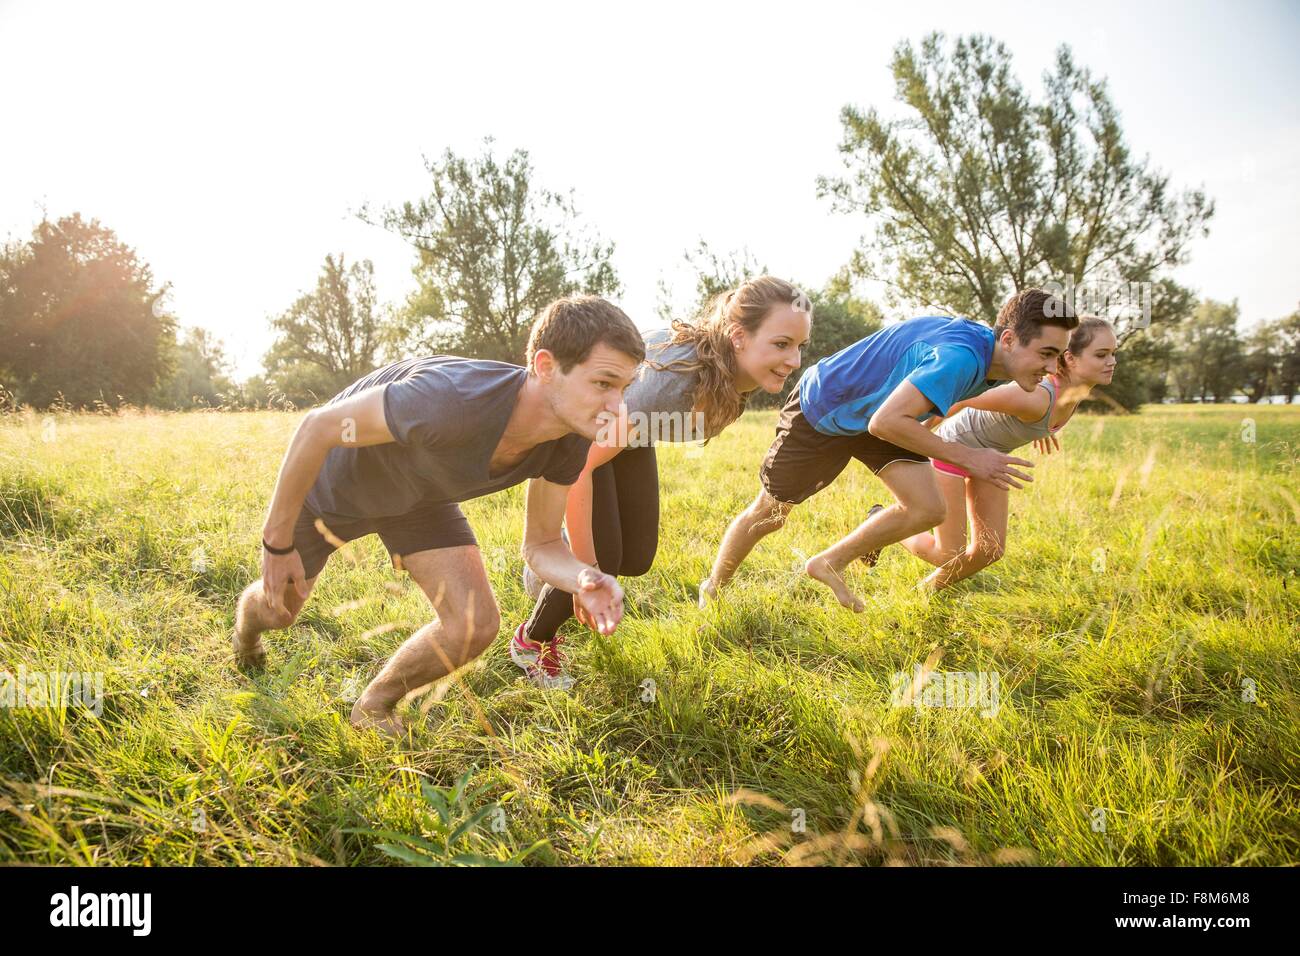 Group of friends running, racing, in field Stock Photo